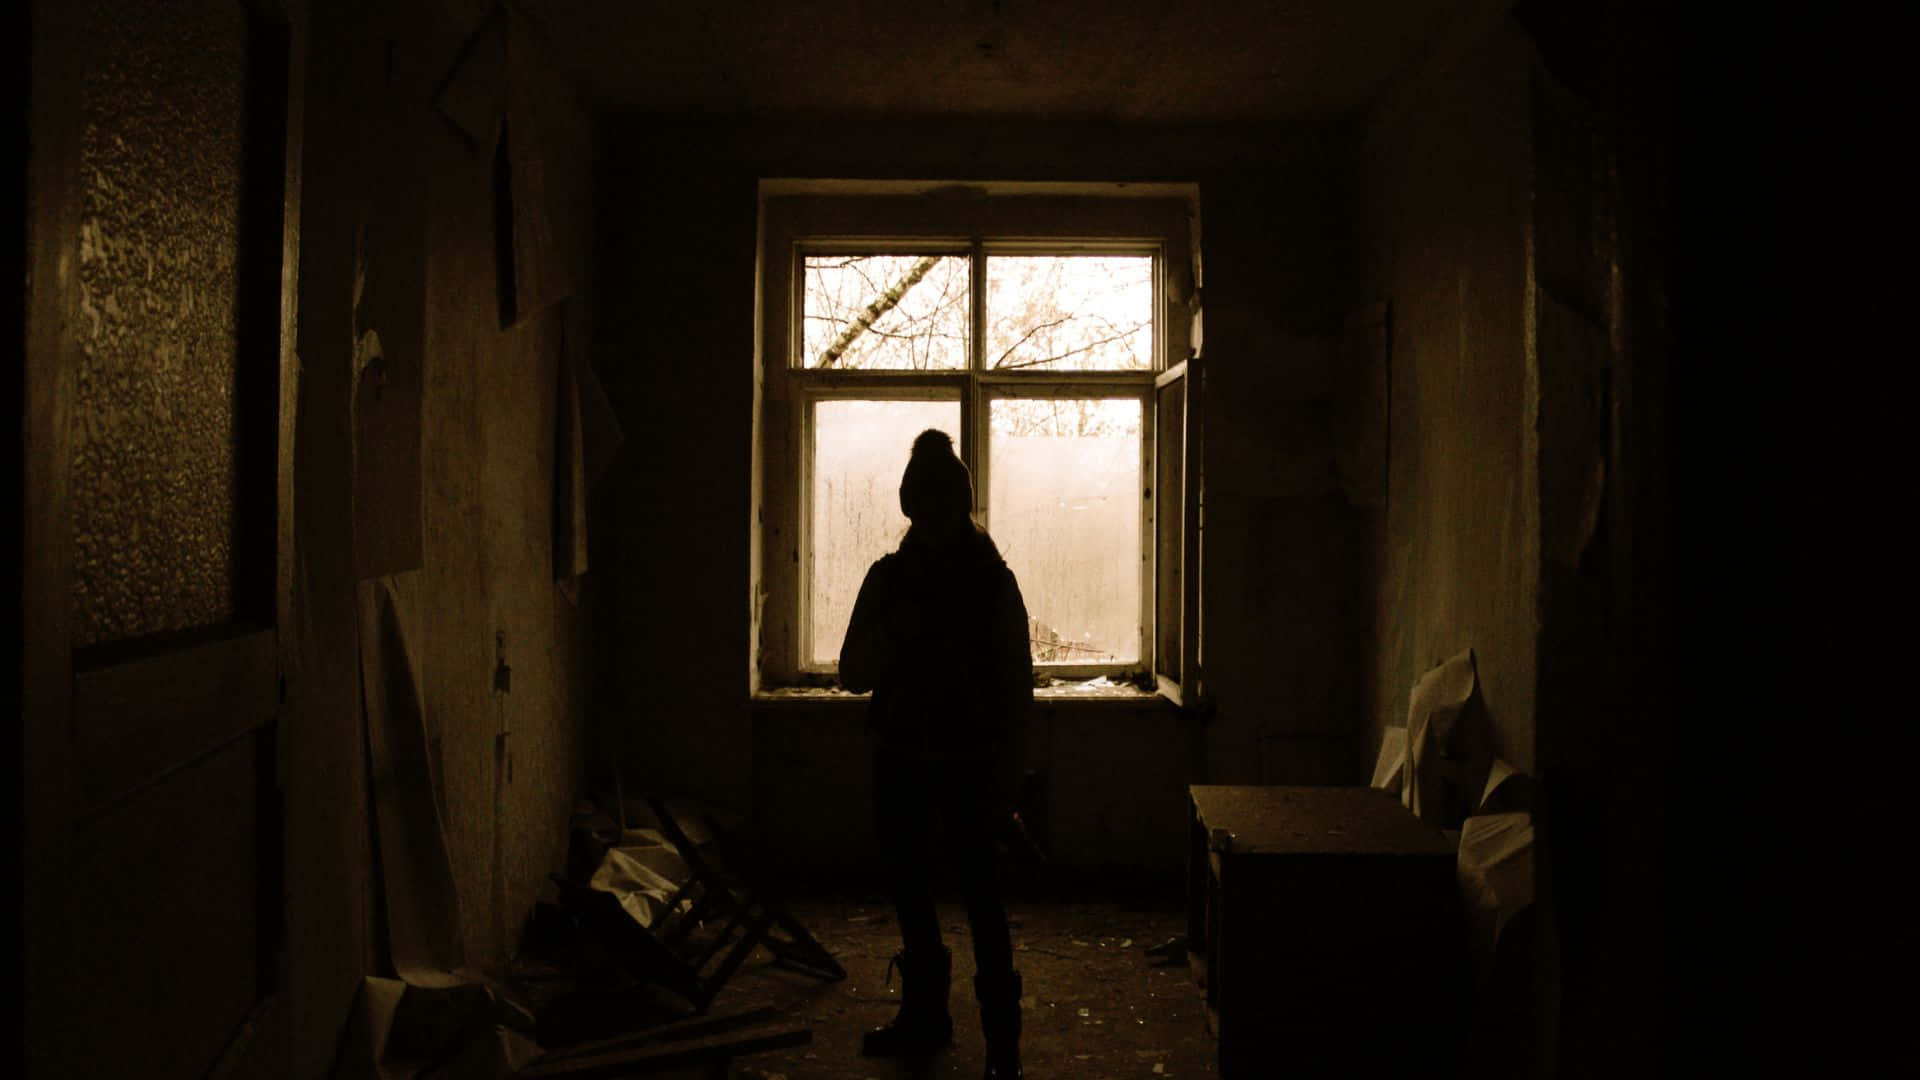 Silhouette_in_ Abandoned_ Room Wallpaper